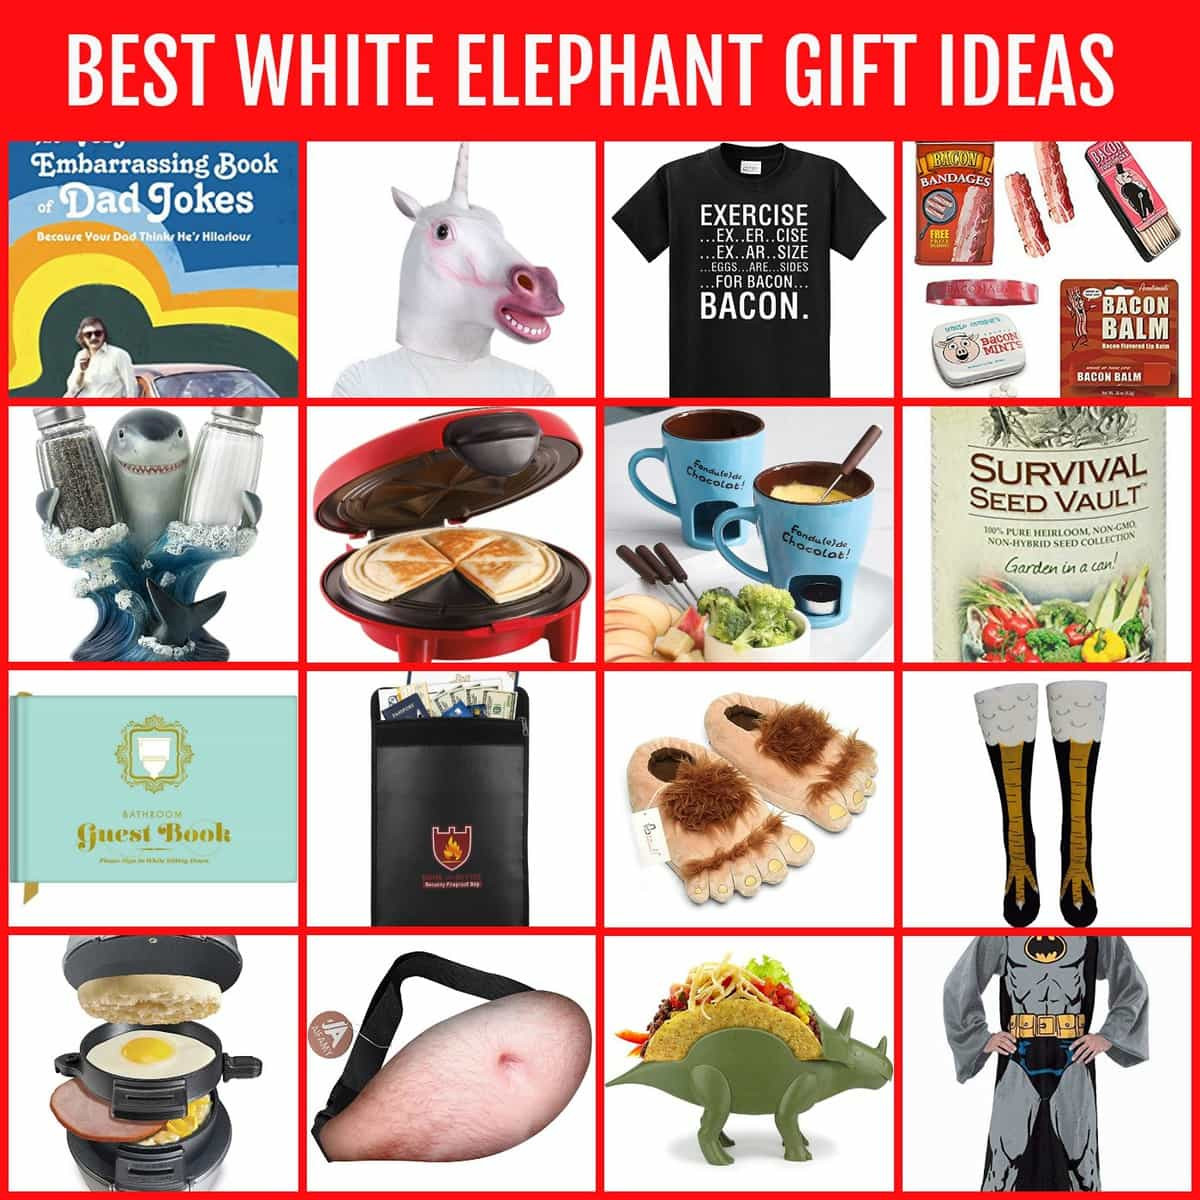 Gift Ideas For White Elephant Christmas Party
 The BEST White Elephant Gifts Funny Useful & DIY Ideas